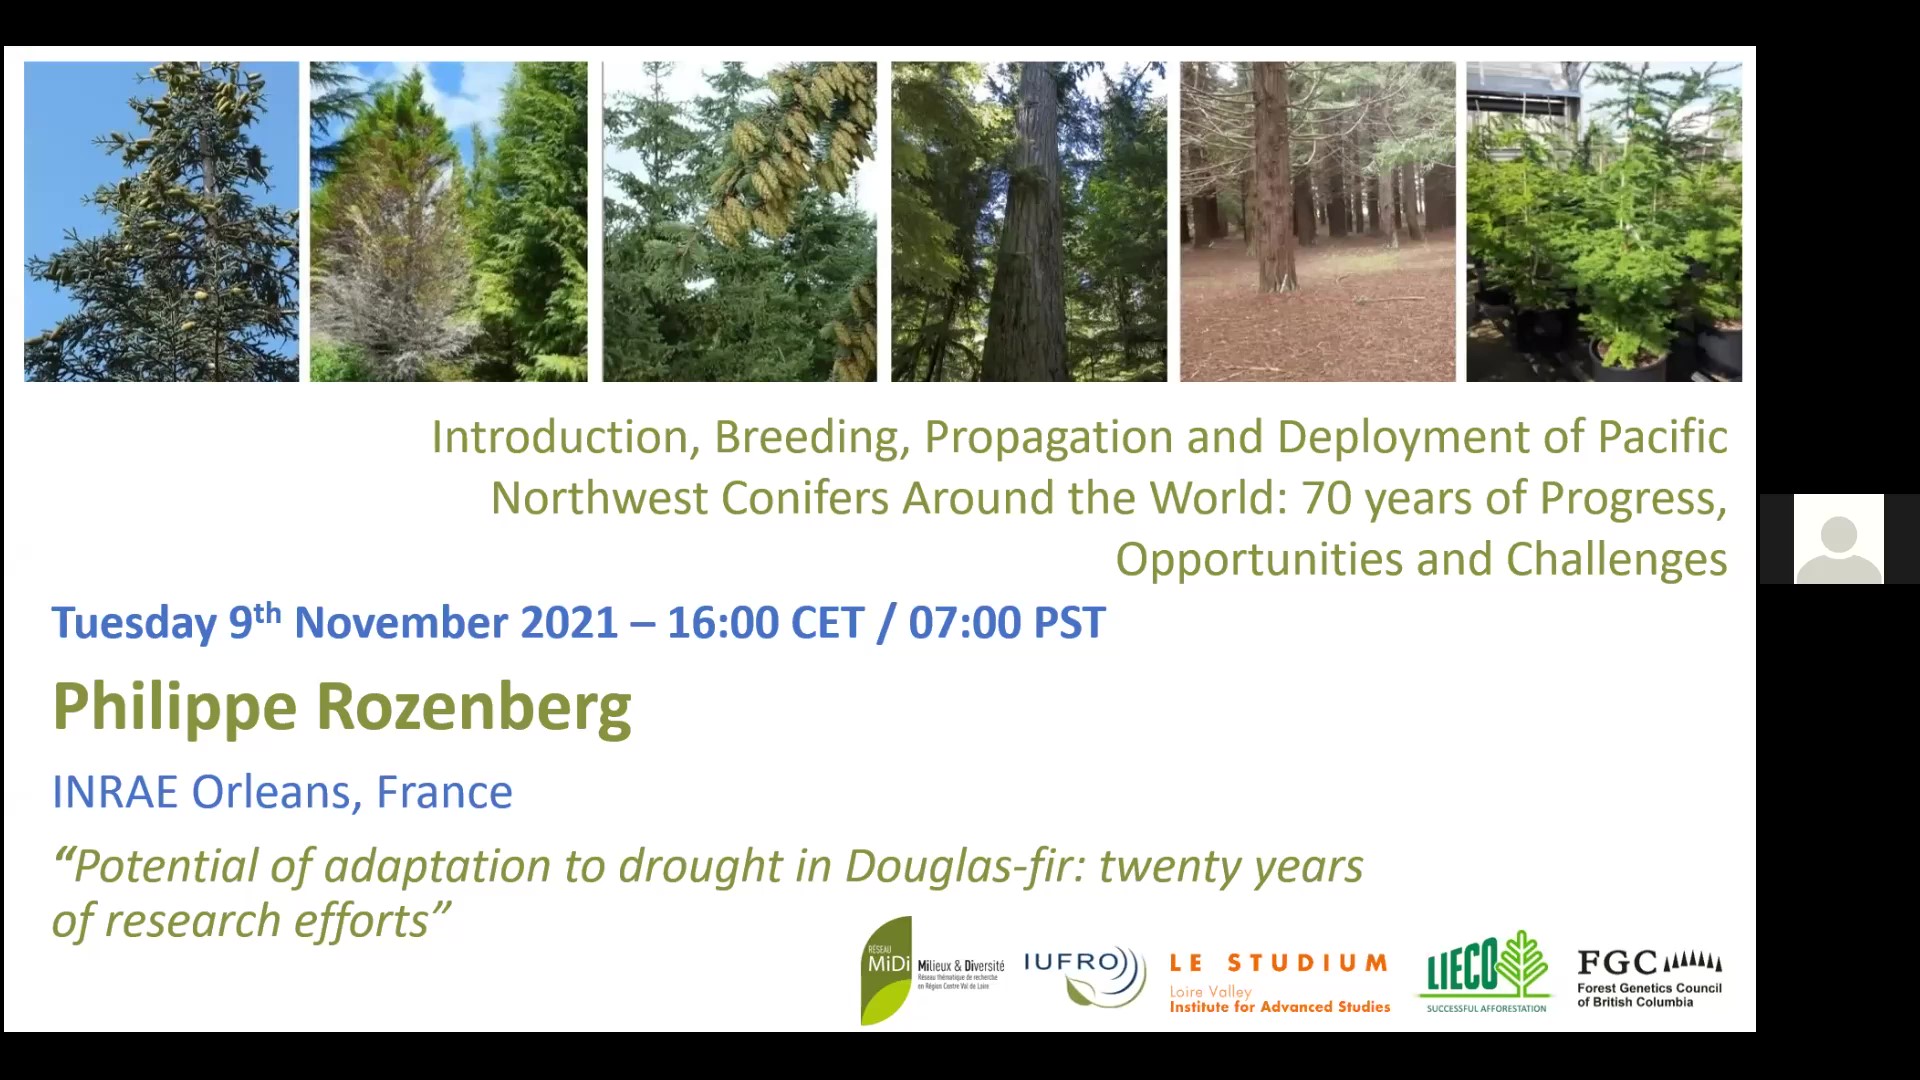 Potential of adaptation to drought in Douglas-fir: twenty years of research efforts - Philippe Rozenberg